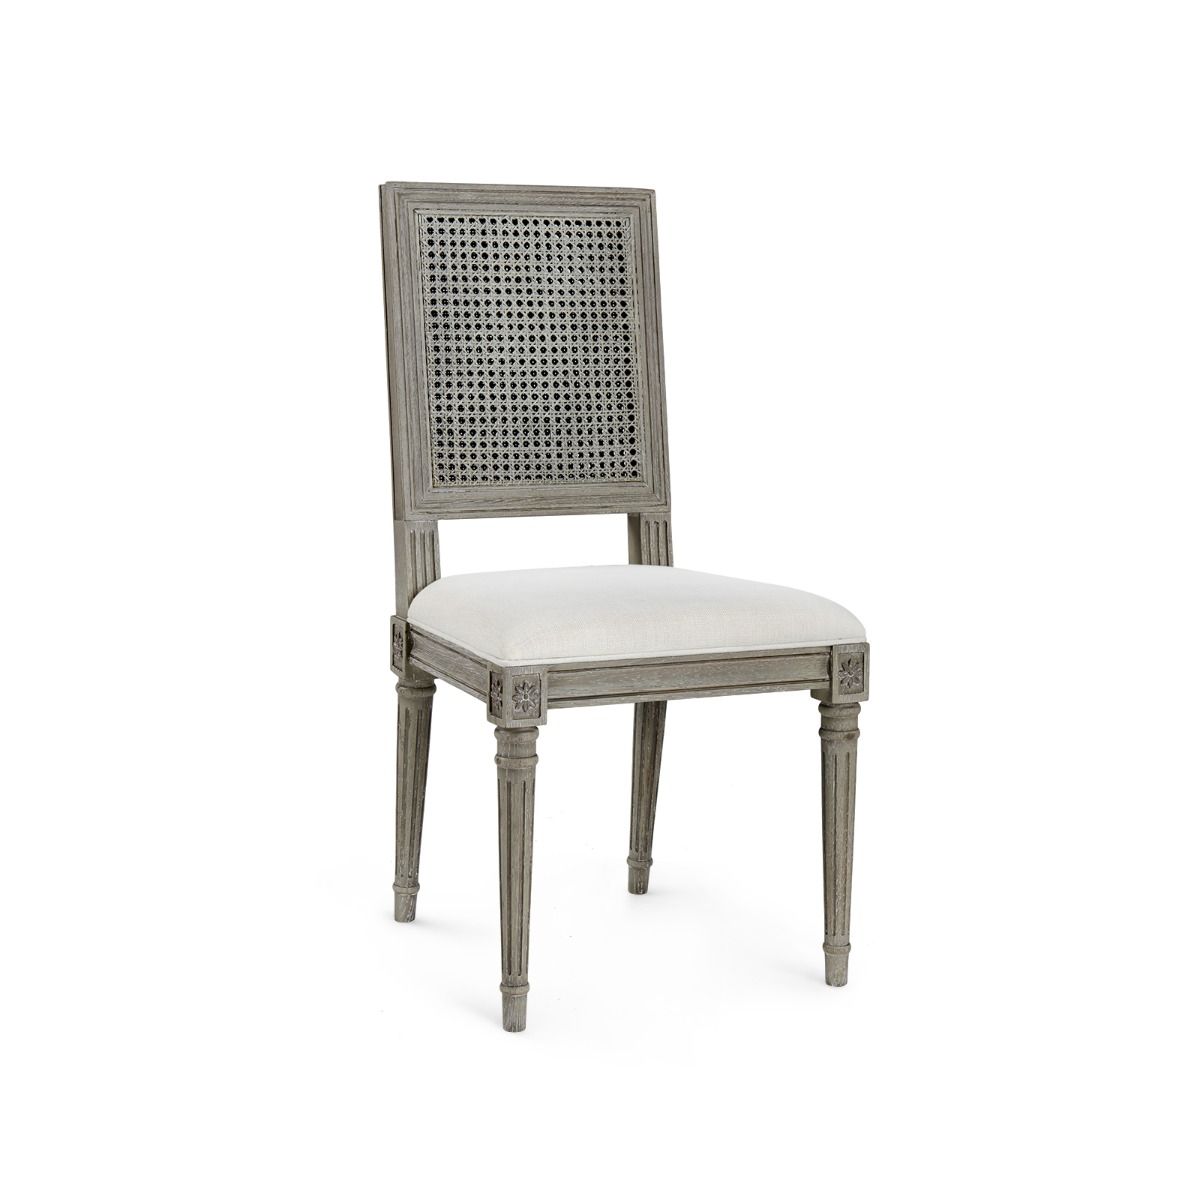 Load image into Gallery viewer, Annette Side Chair GrayDining Chair Bungalow 5  Gray   Four Hands, Burke Decor, Mid Century Modern Furniture, Old Bones Furniture Company, Old Bones Co, Modern Mid Century, Designer Furniture, https://www.oldbonesco.com/
